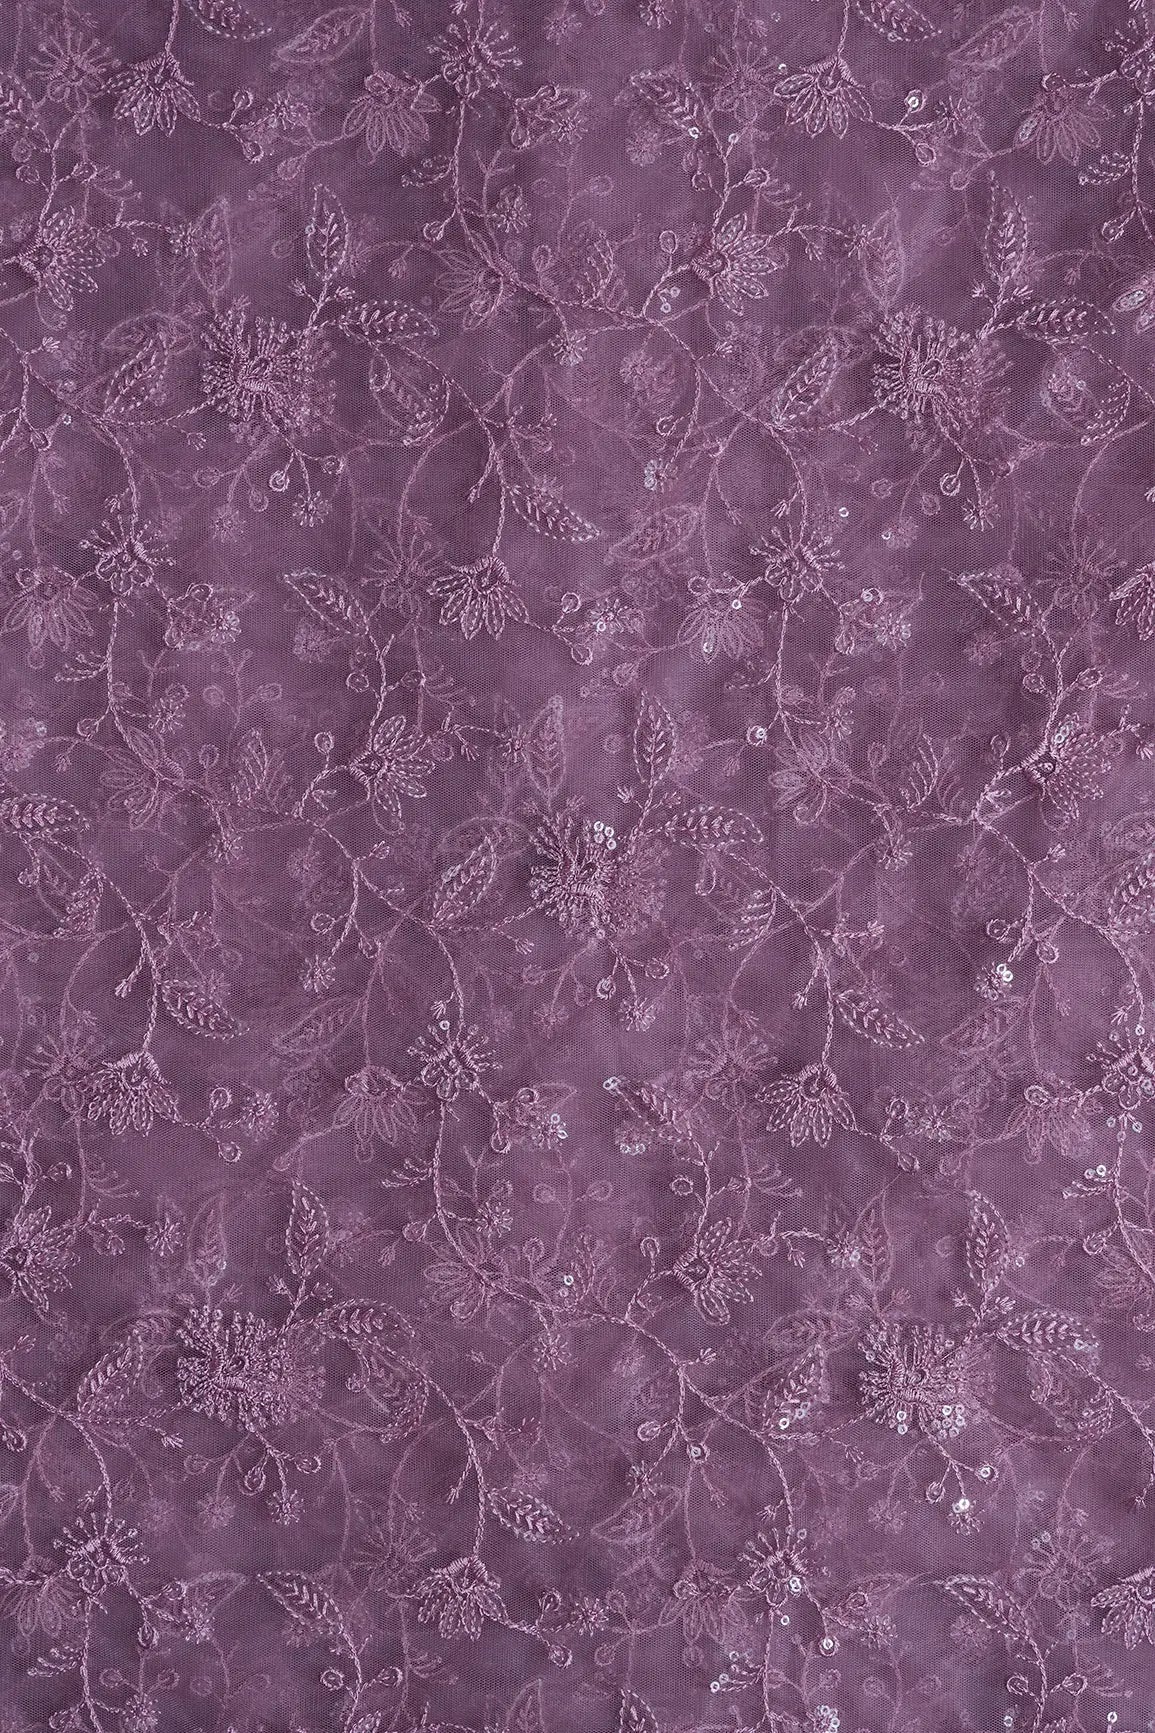 Mauve Thread With Water Sequins Floral Embroidery On Mauve Soft Net Fabric - doeraa